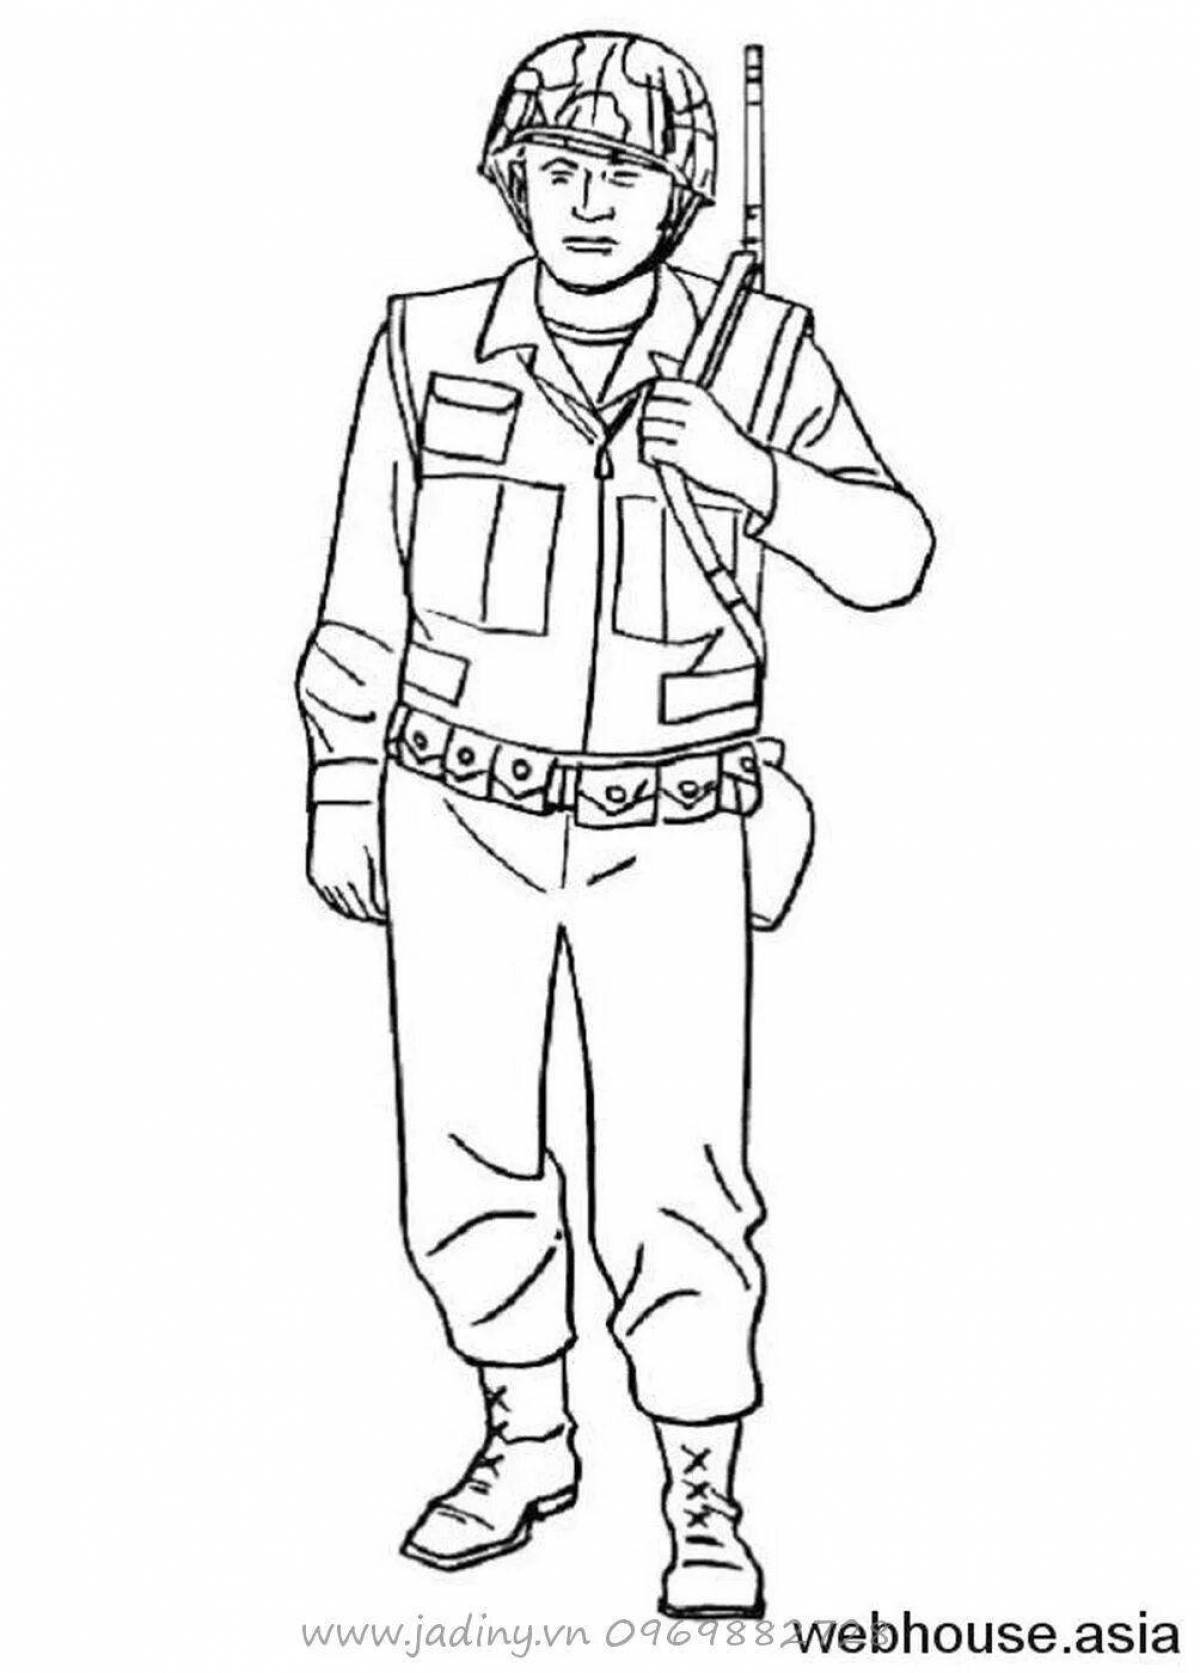 Delightful military profession coloring for youth